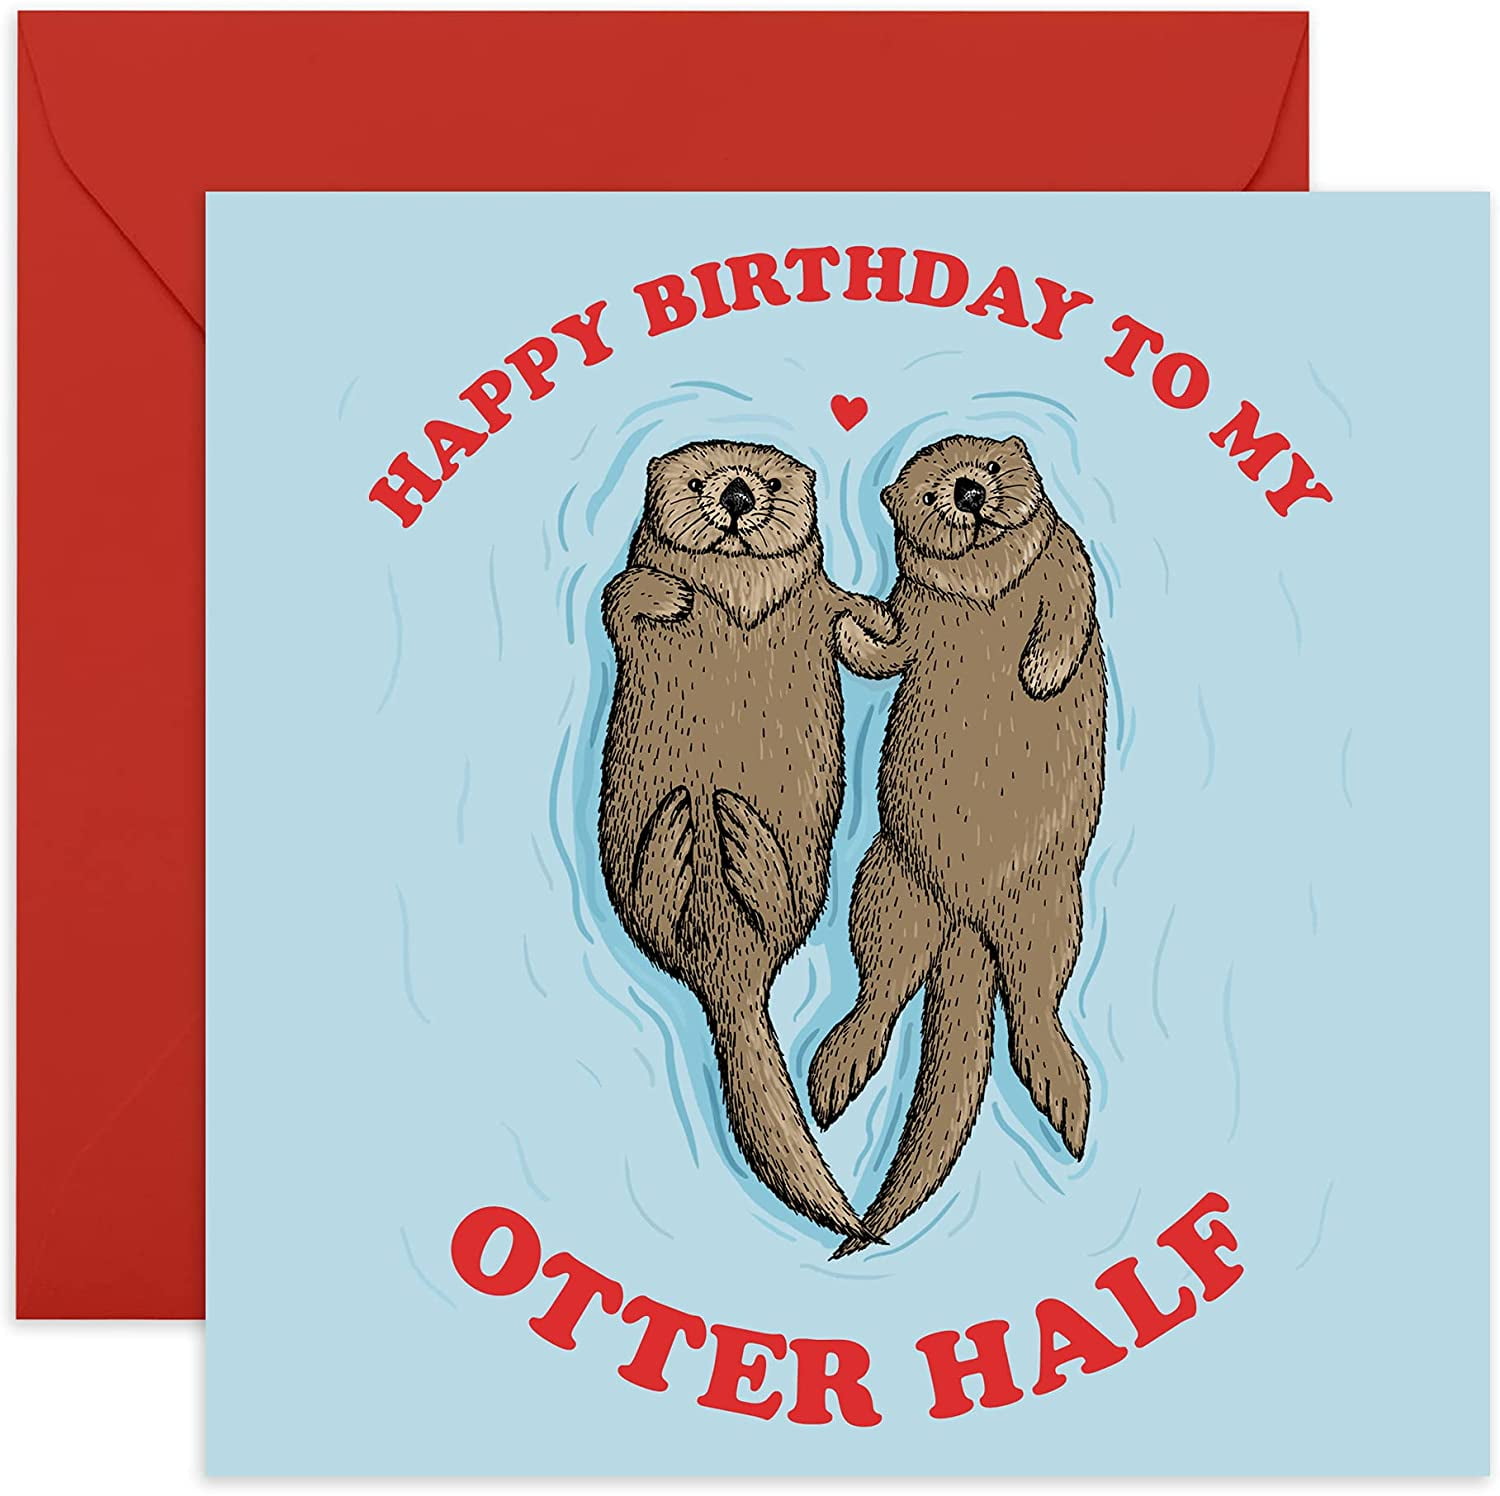 Central 23 - Funny Birthday Card - 'Happy Birthday To My Otter Half' - For  Boyfriend Girlfriend Wife Husband Fiance - Cute Animal Humor - Comes with  Fun Stickers 